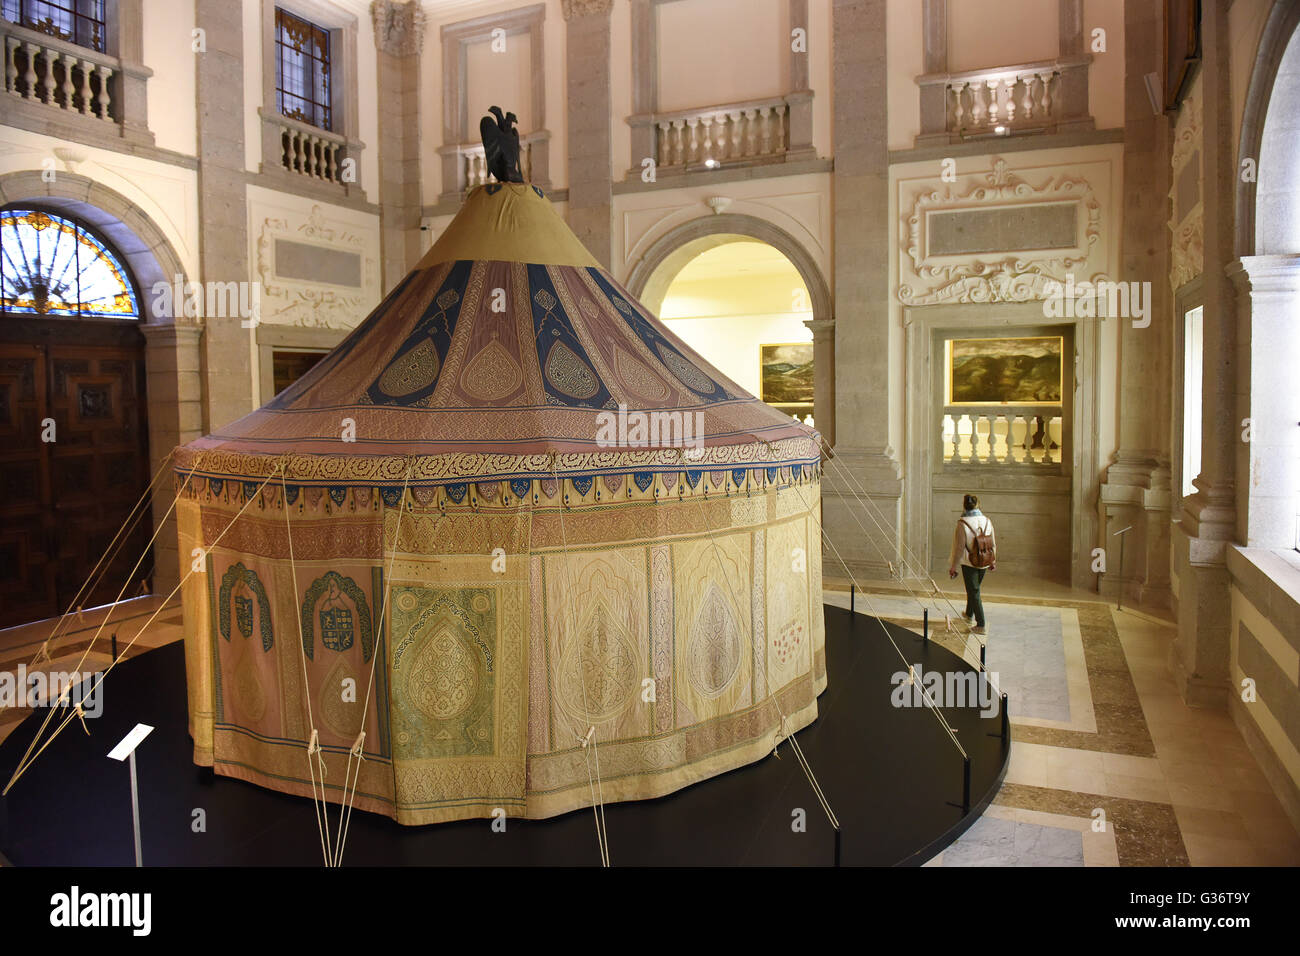 16th century Indo-Portuguese tent known as the Emperor Charles V tent at the Alcazar of Toledo museum in Spain Stock Photo